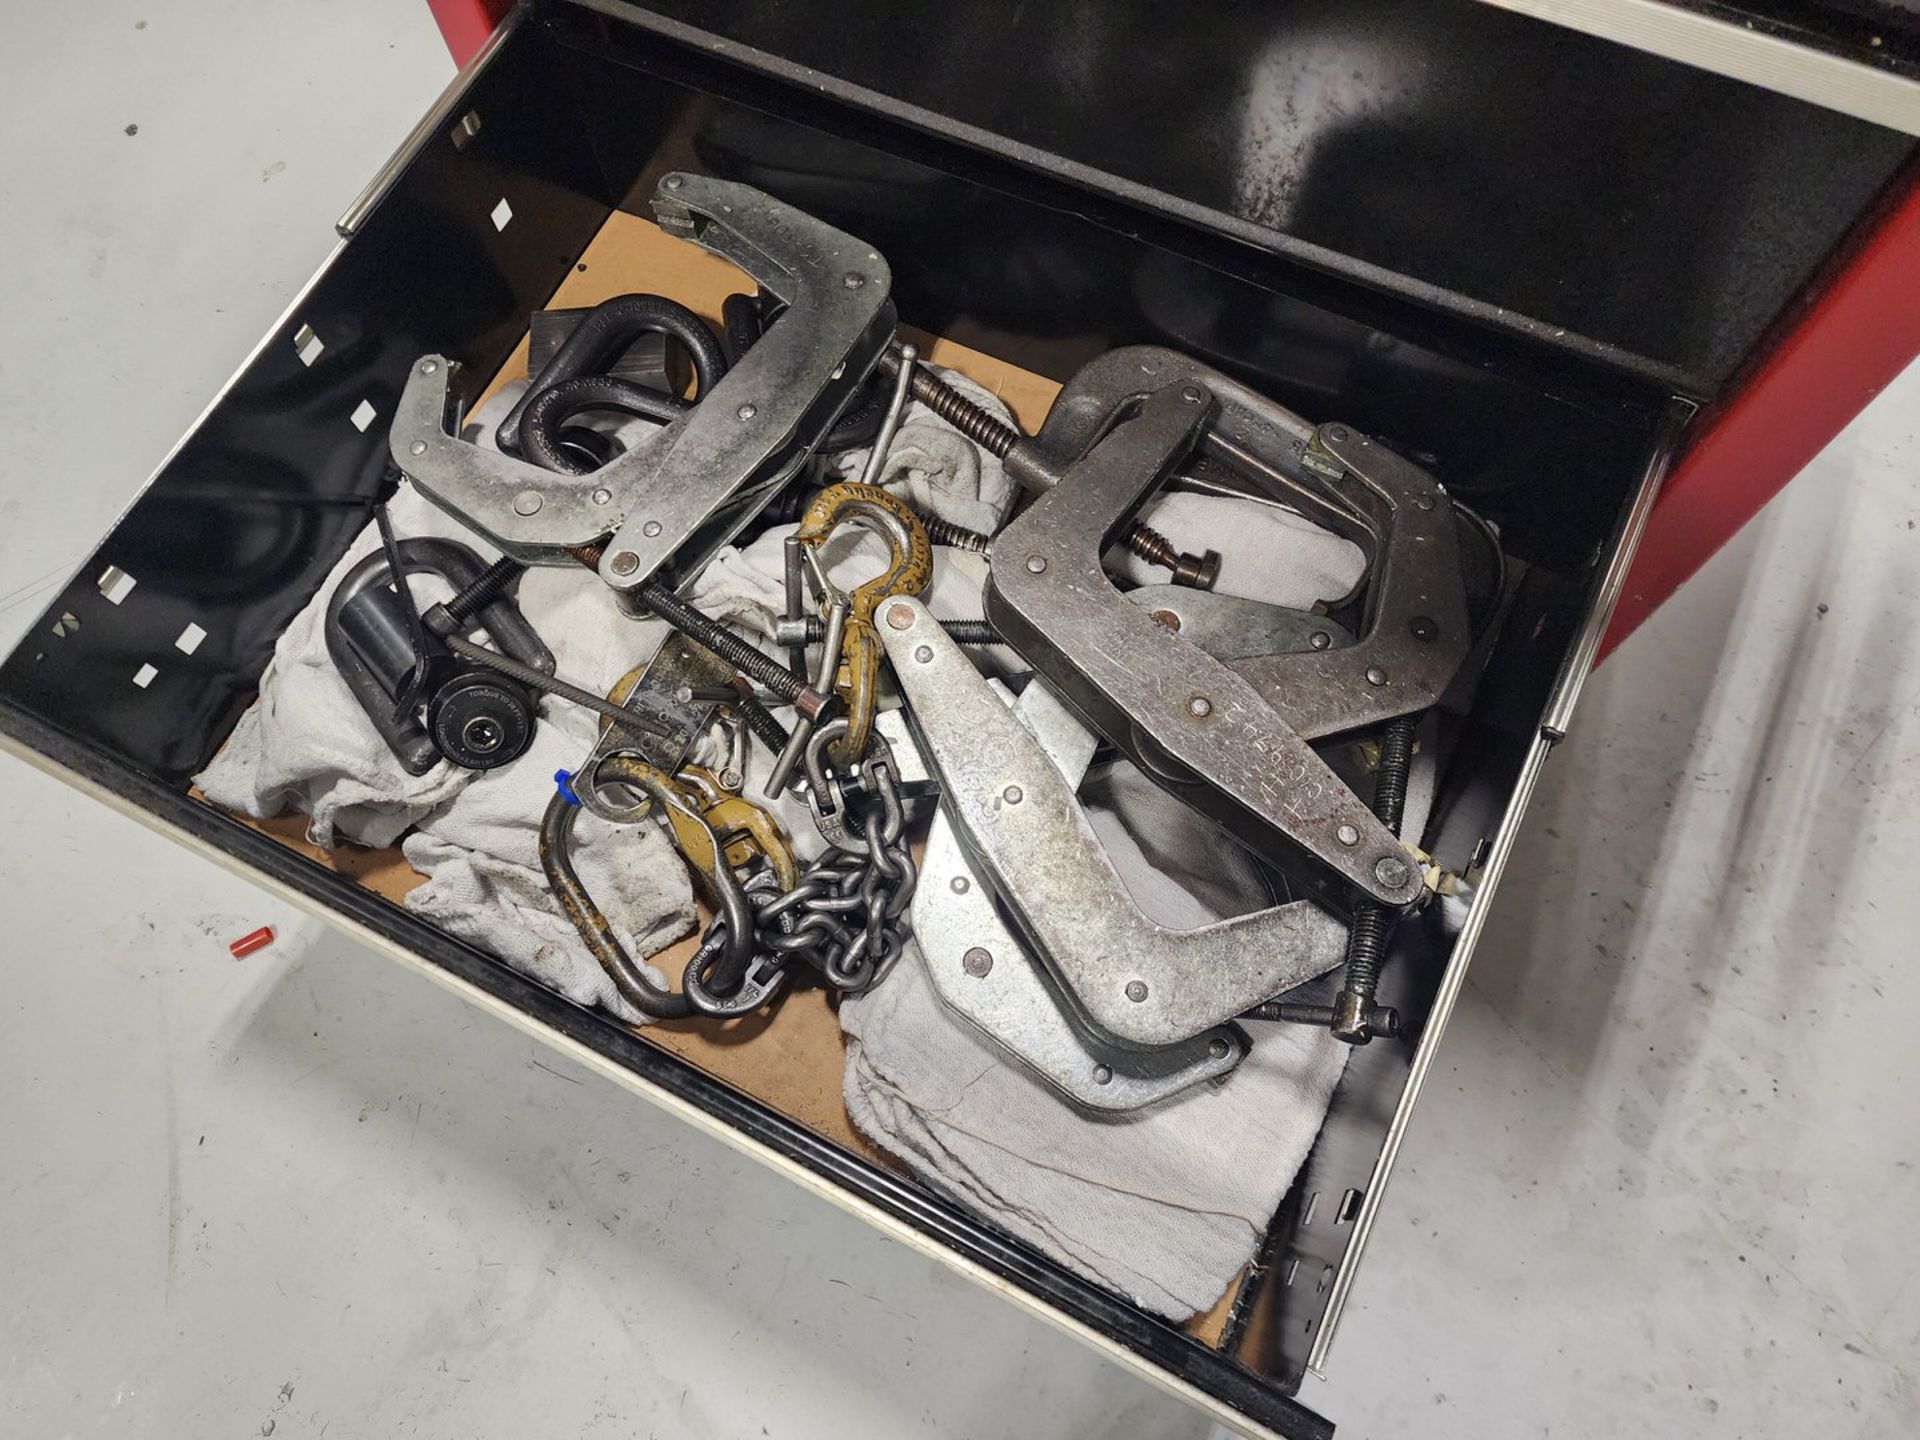 Craftsman Rolling Tool Box W/ Contents (Toyoda CNC Area) - Image 8 of 8